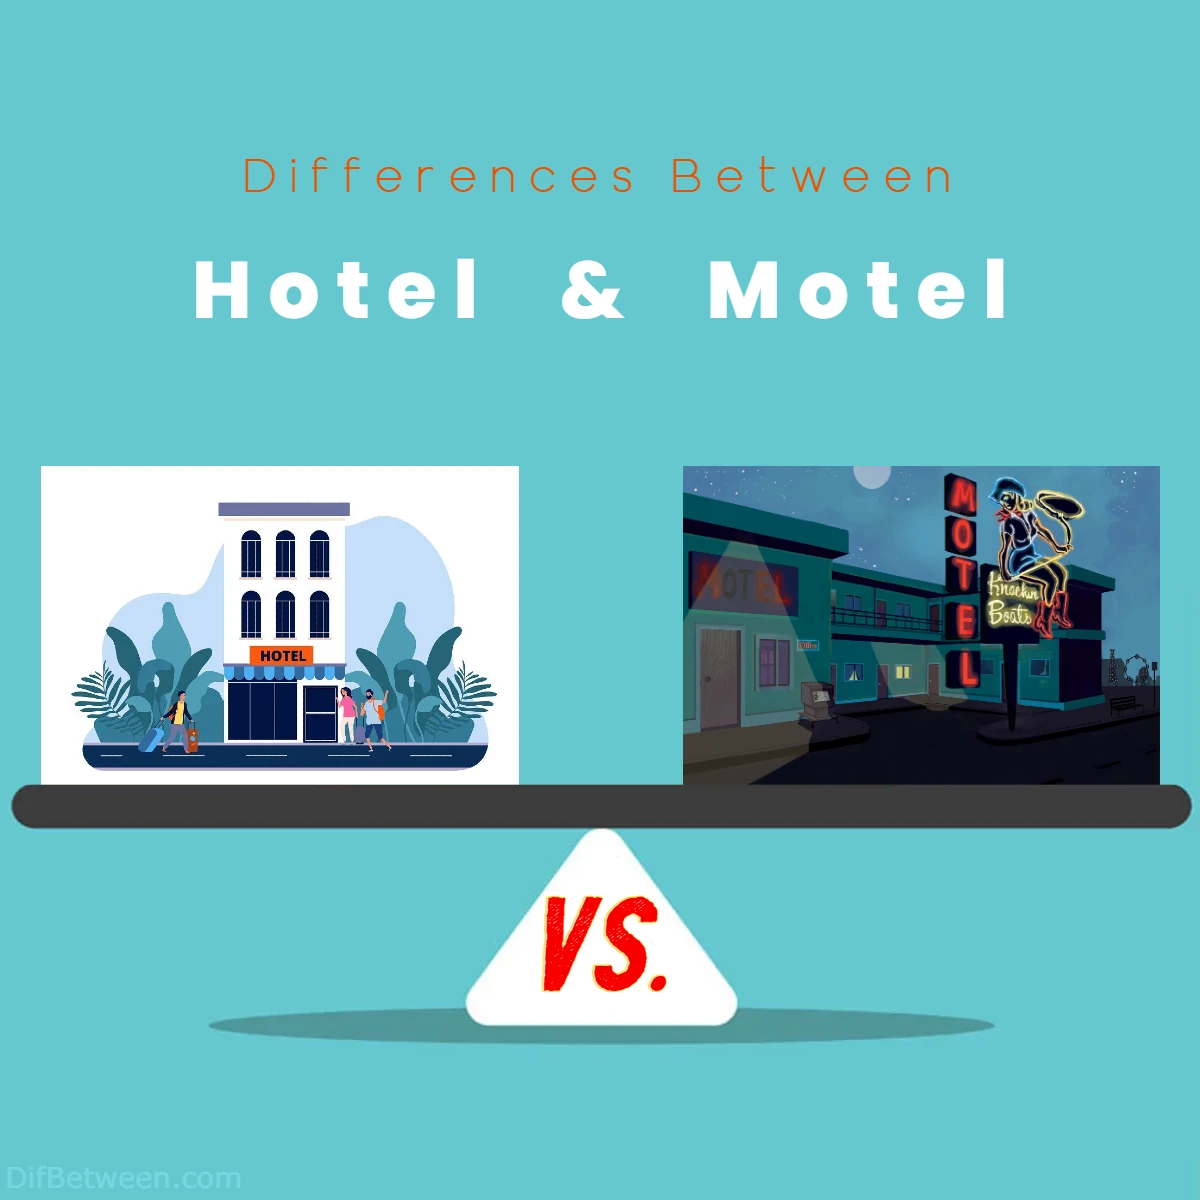 Differences Between Hotel vs Motel